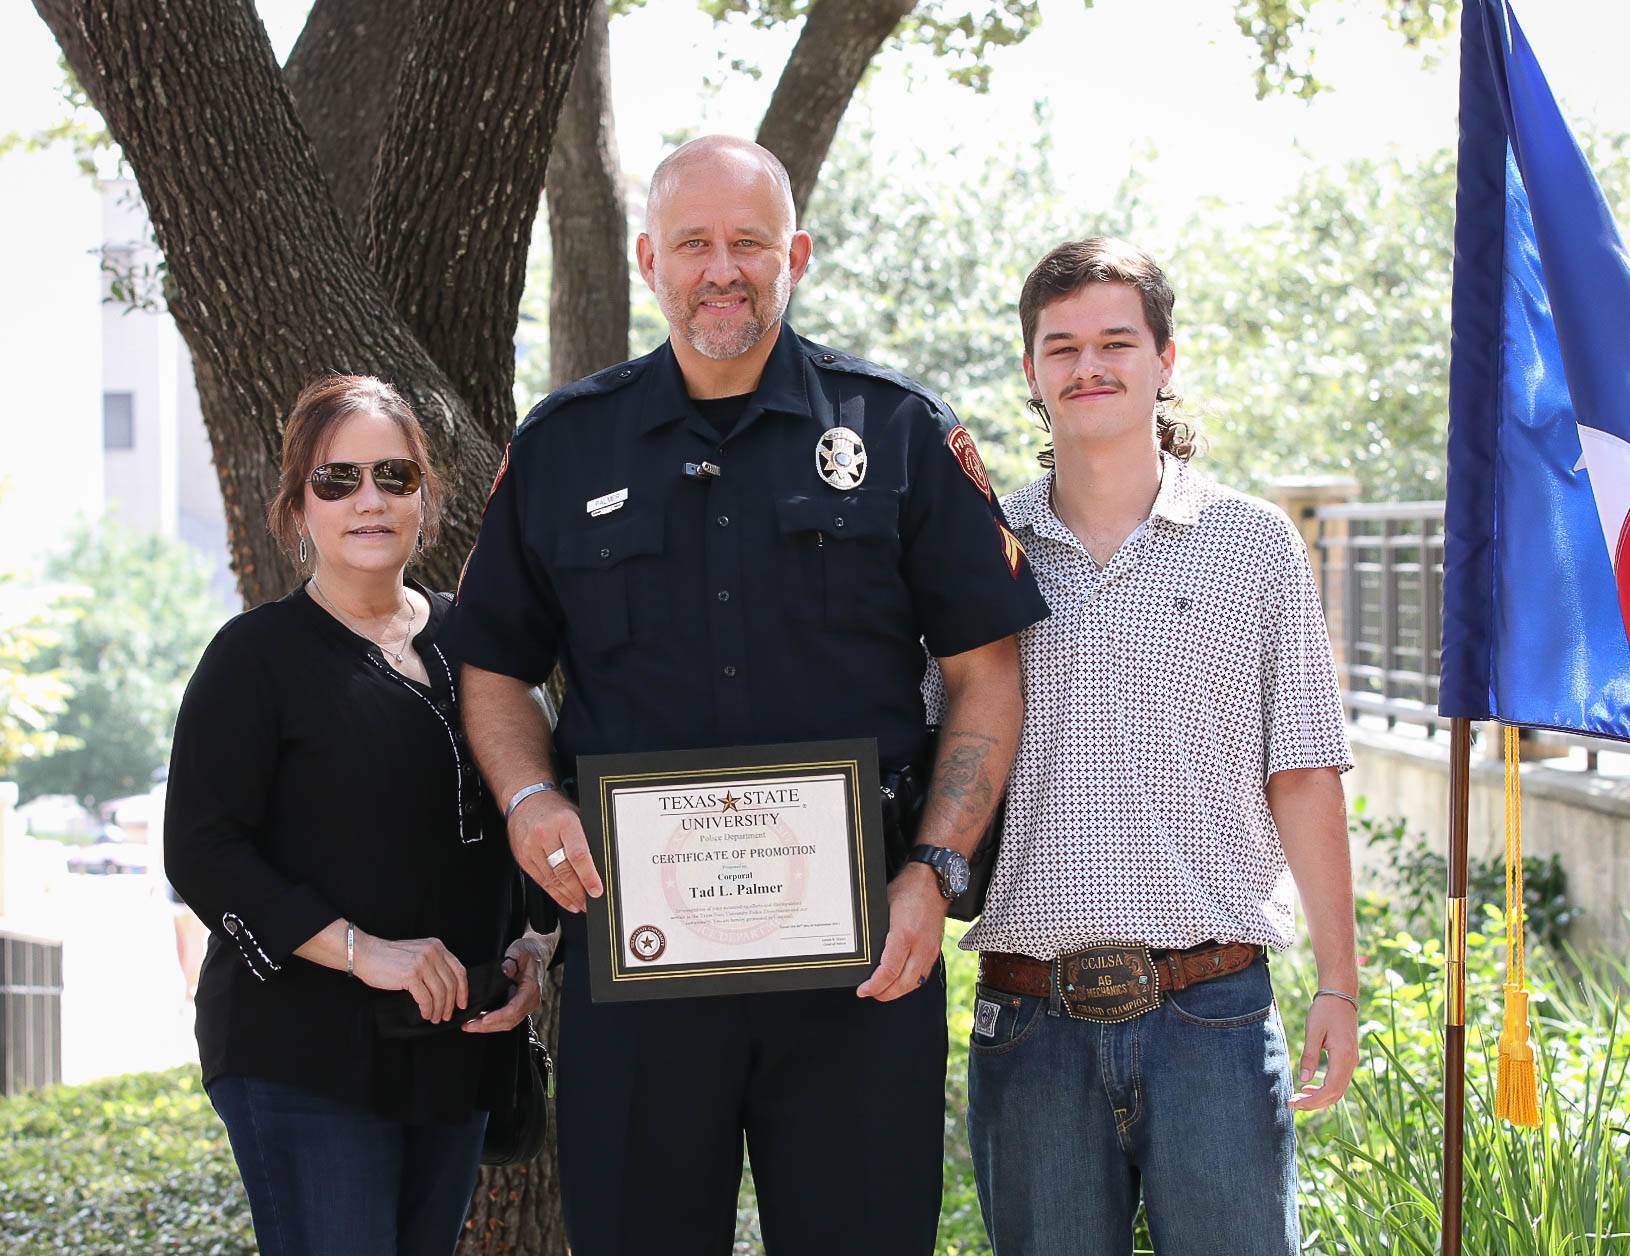 Officer Palmer with Wife and Son